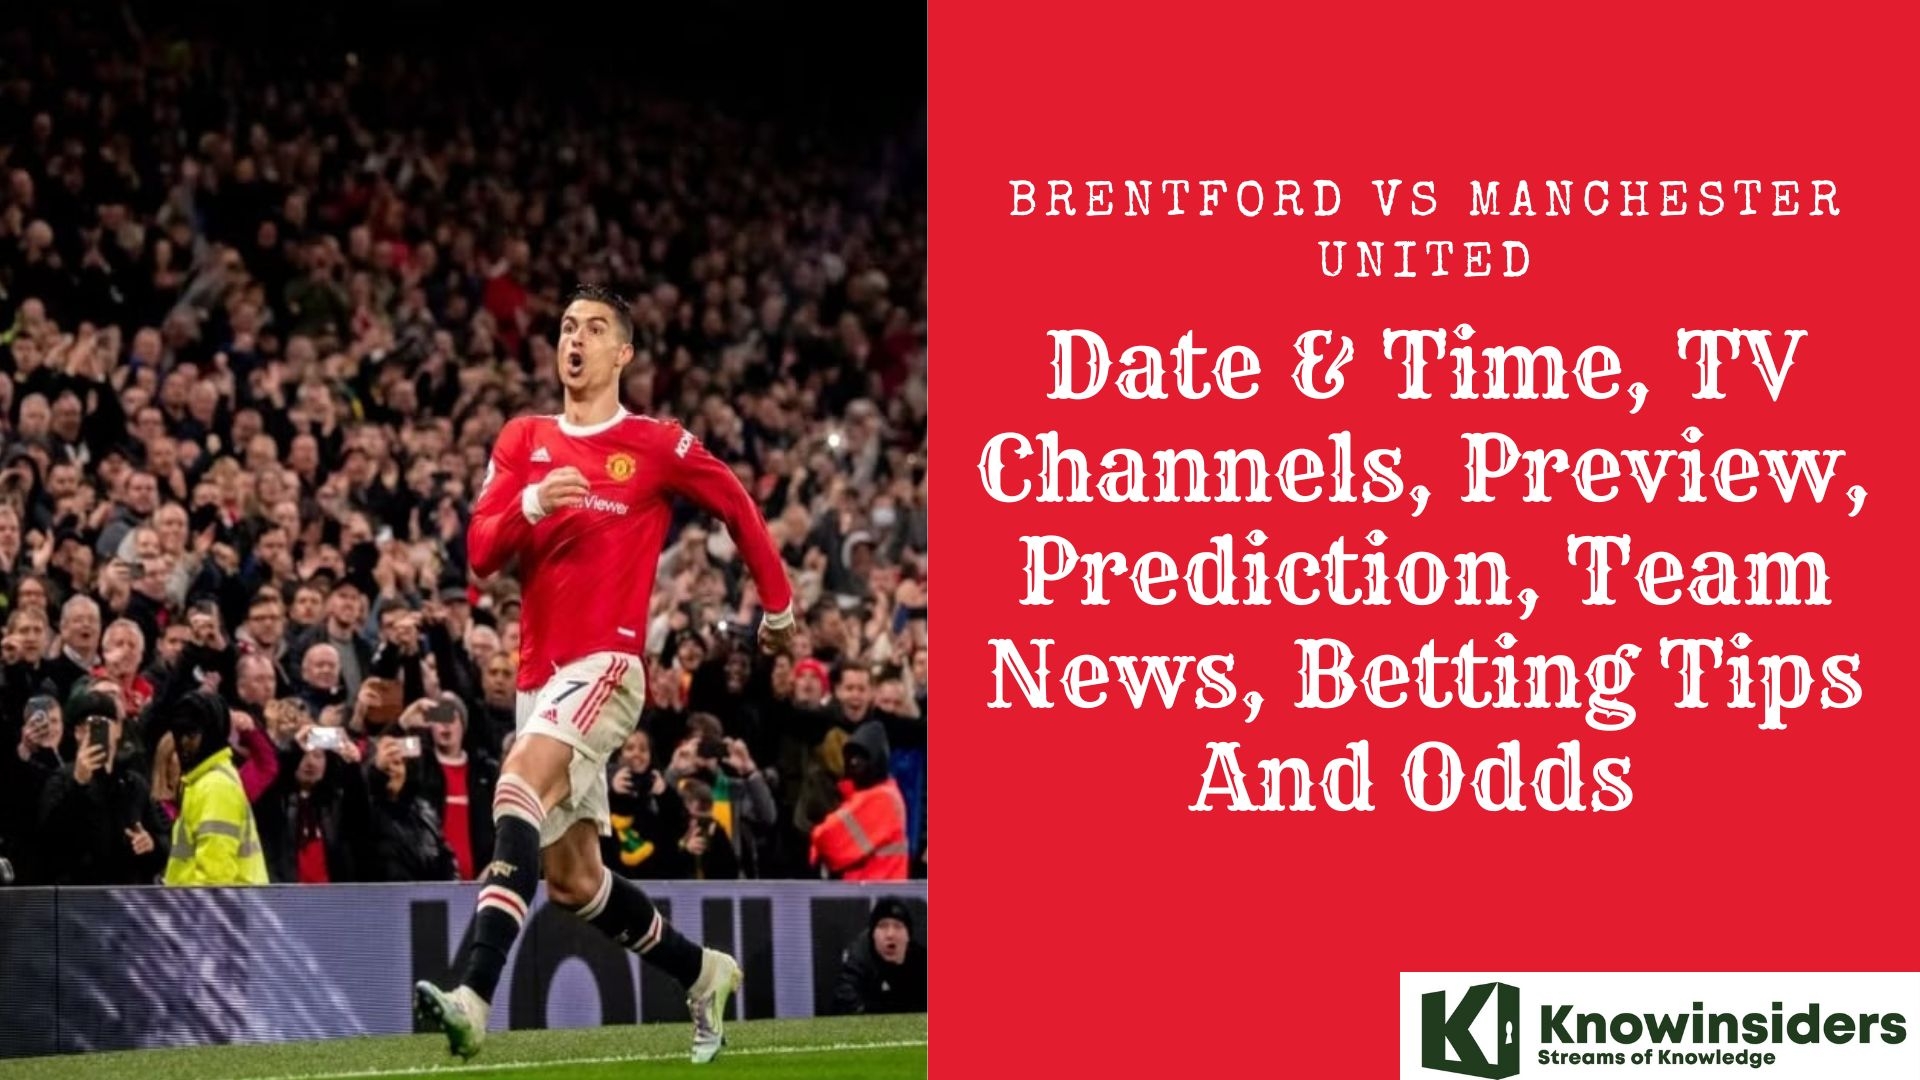 Brentford vs Manchester United: Date & Time, TV Channels, Preview, Prediction, Team News, Betting Tips And Odds Knowinsiders.com